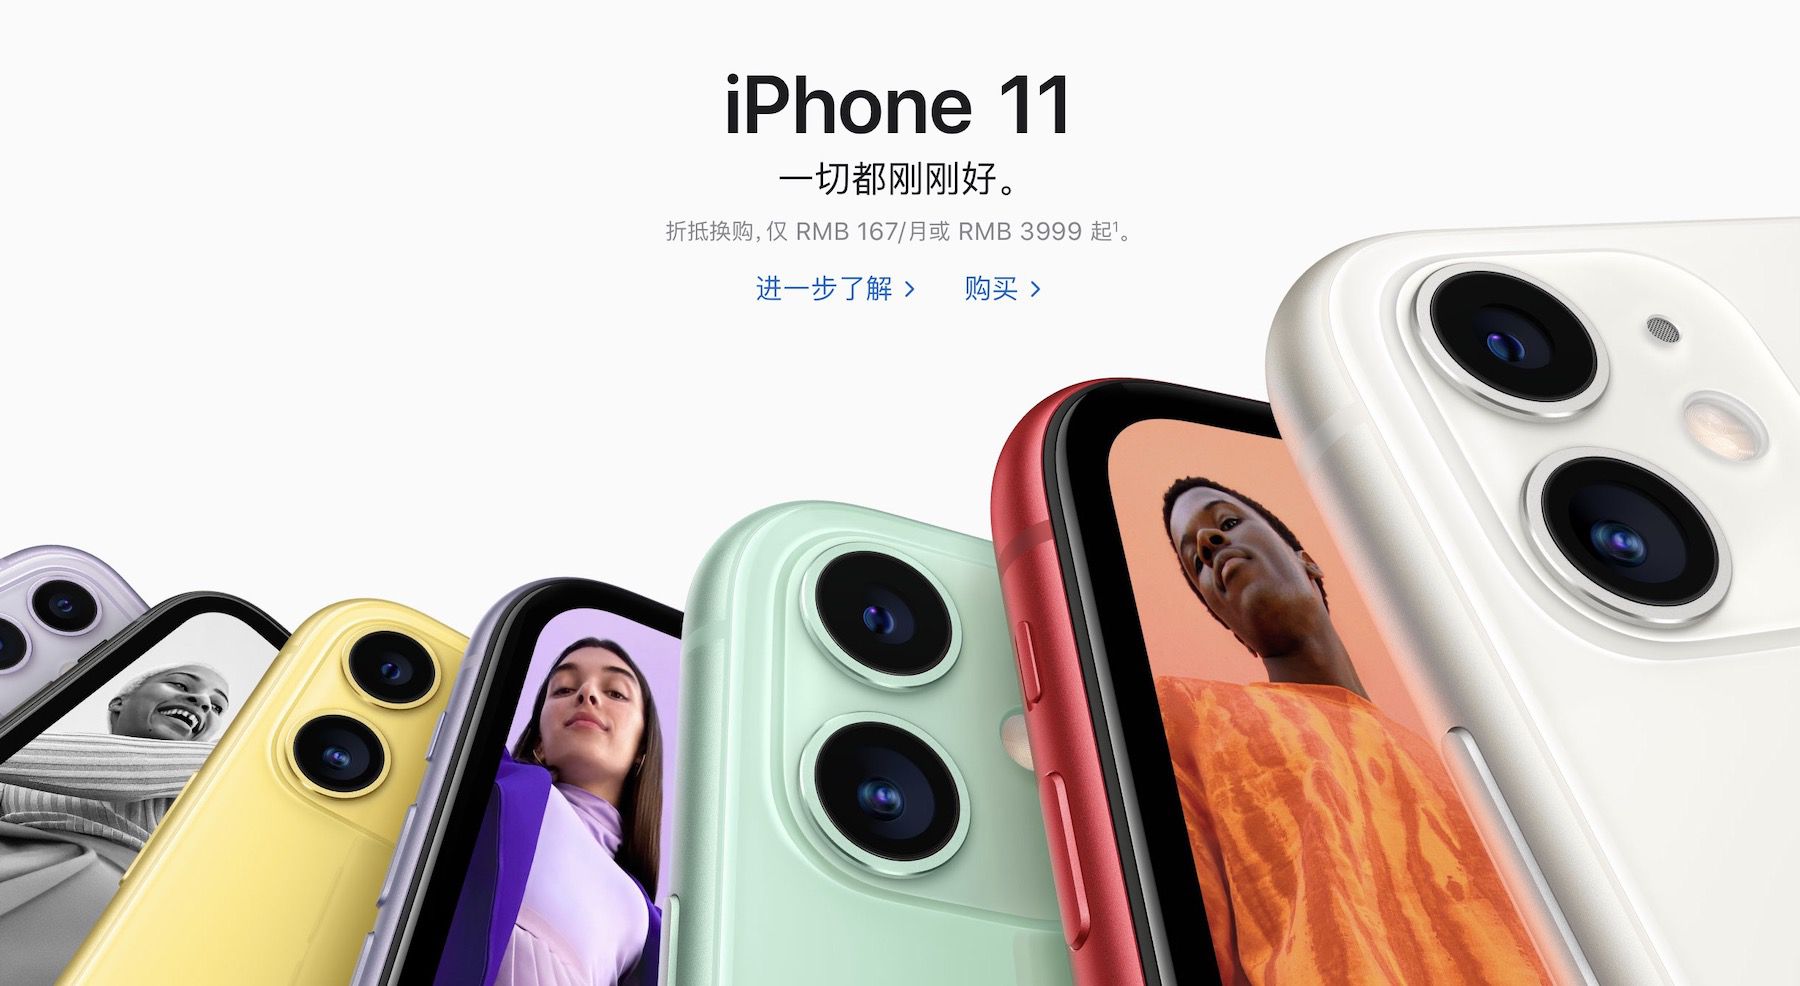 Chinese Retailers Slashing iPhone 11 Prices to Entice Reluctant Customers -  MacRumors